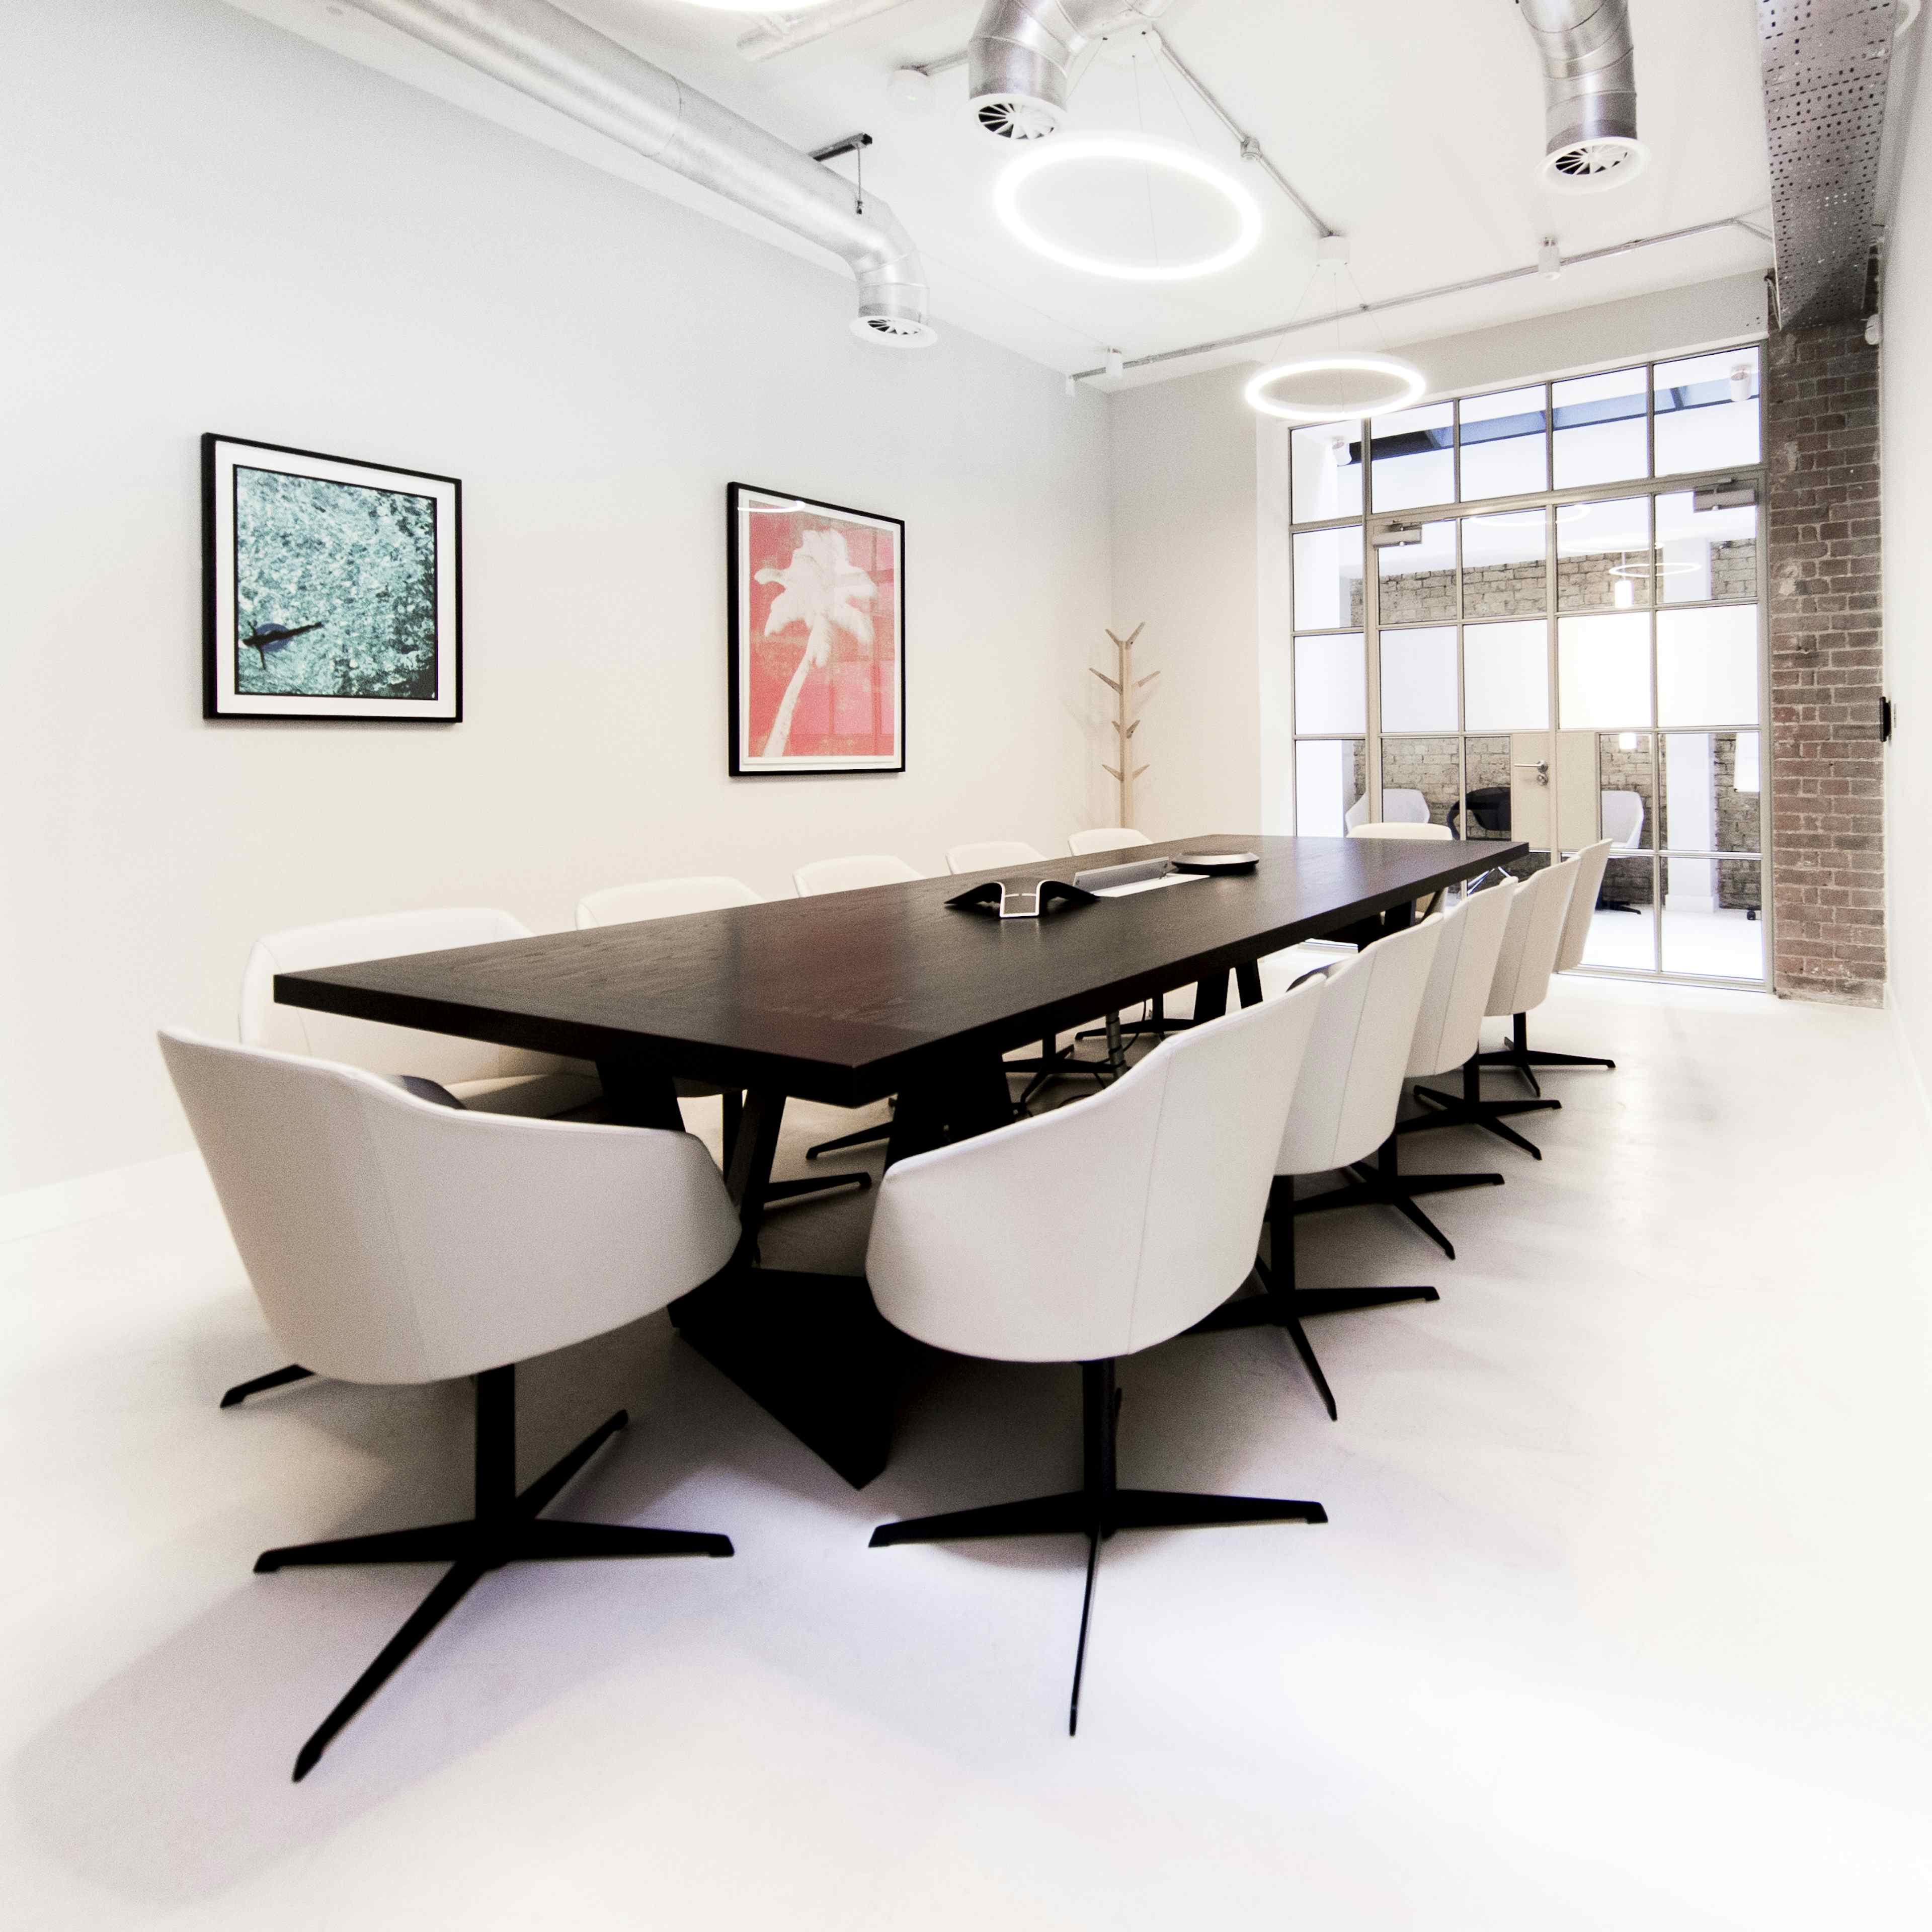 FORA- Clerkenwell, Dallington St, Gallery on 5 - The Boardroom image 3